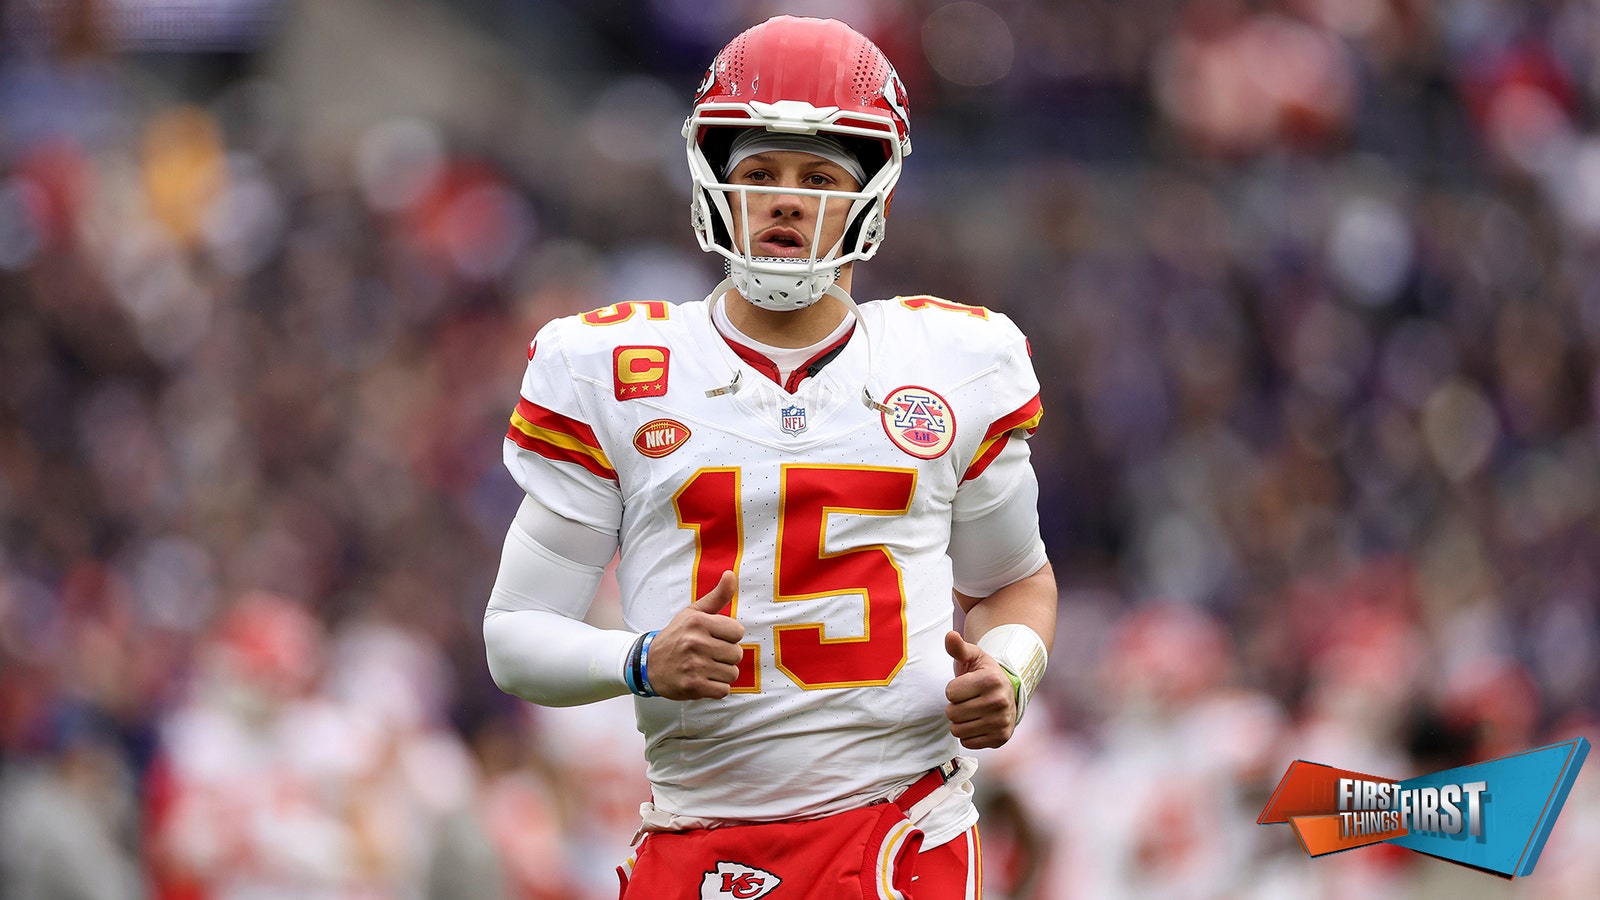 Mahomes leads Chiefs to Super Bowl, their 4th appearance in 5 years